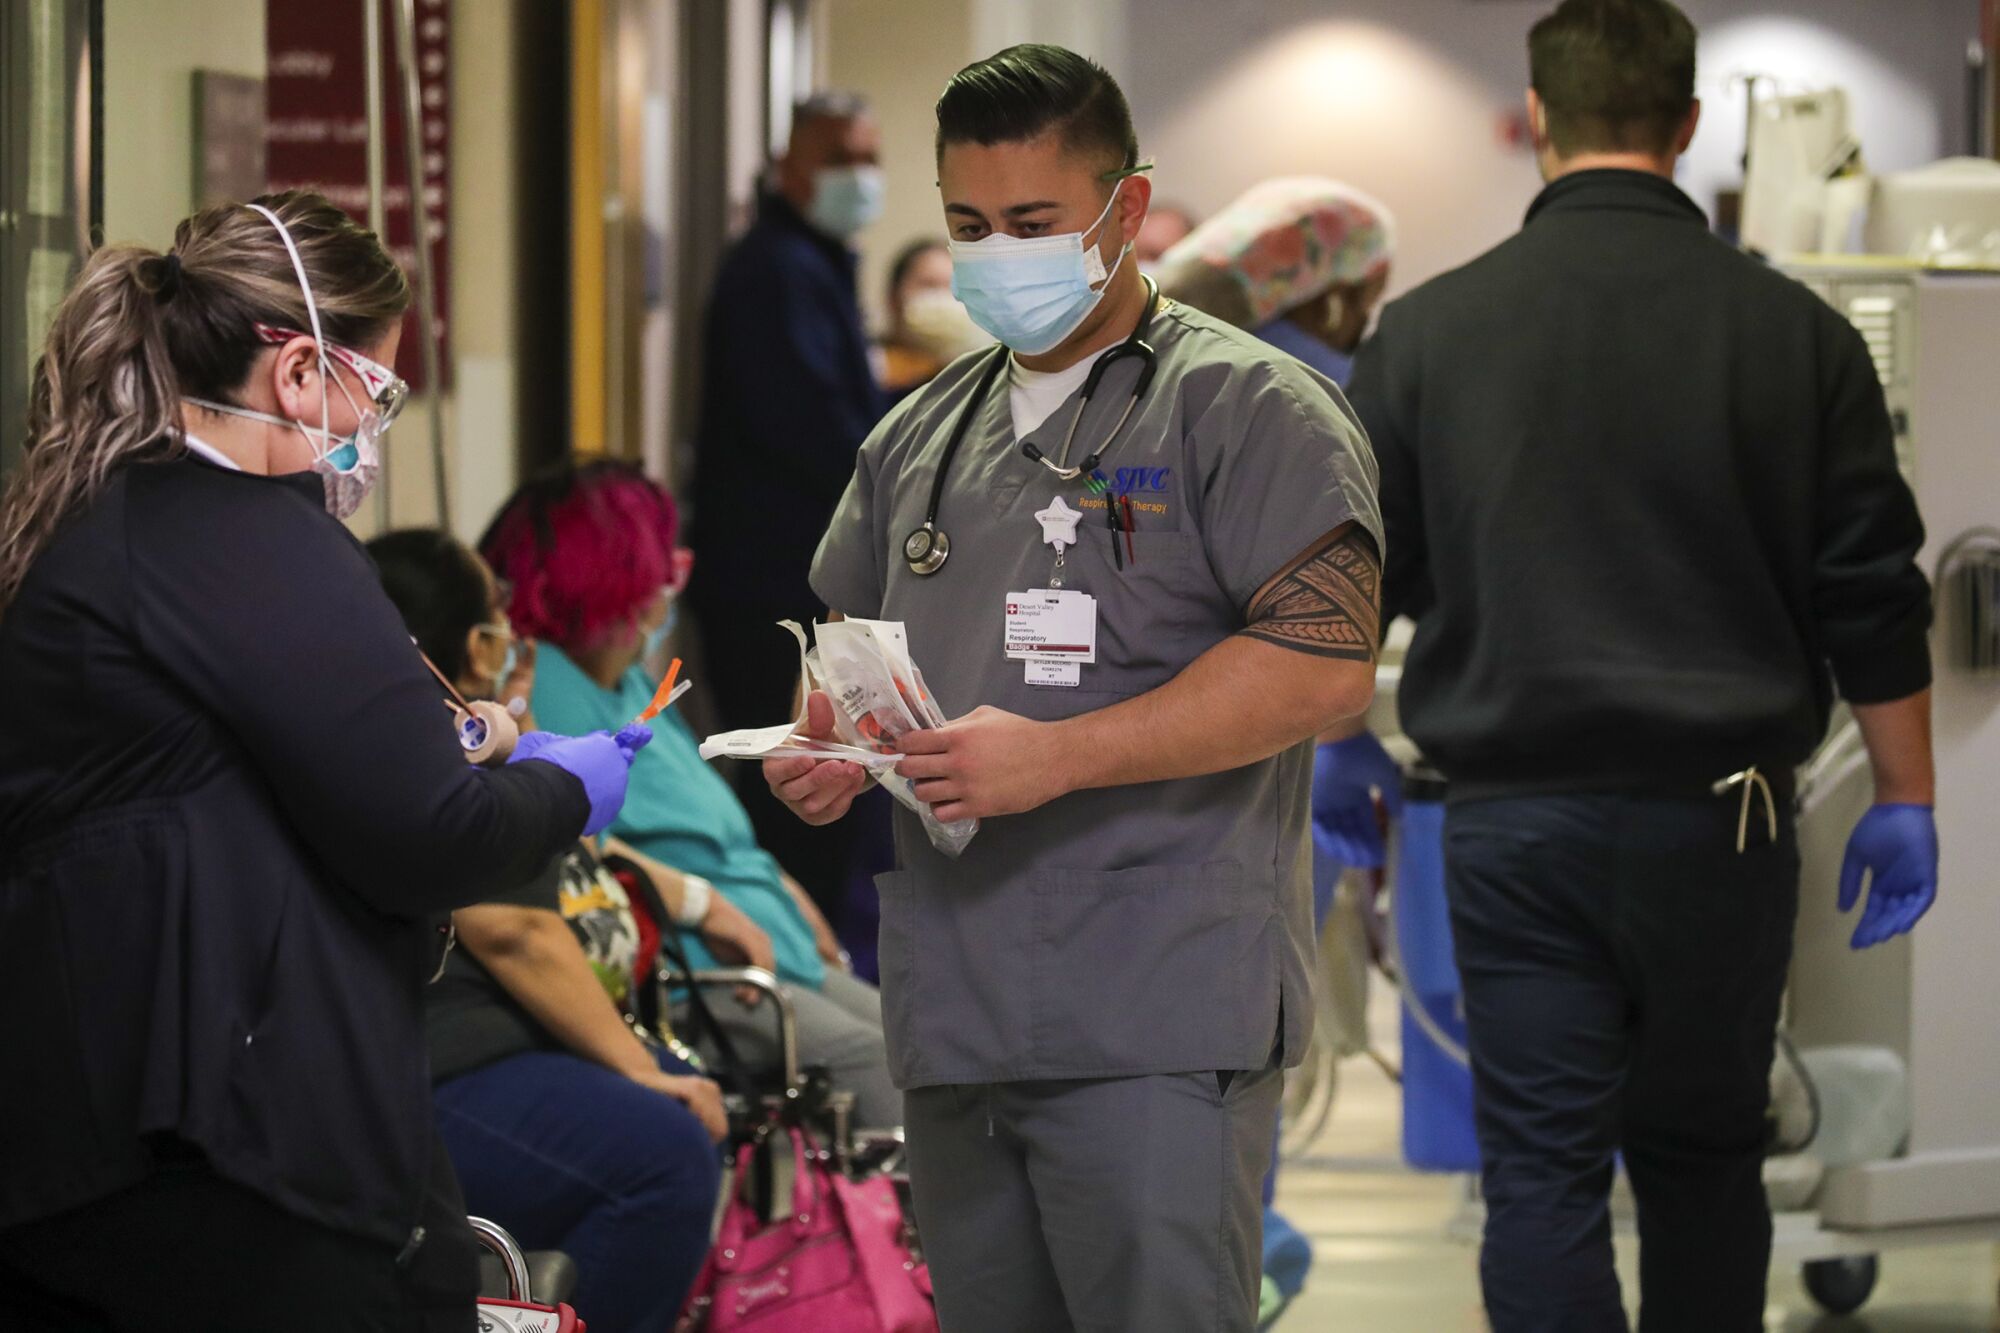 Two medical workers in a hospital hallway